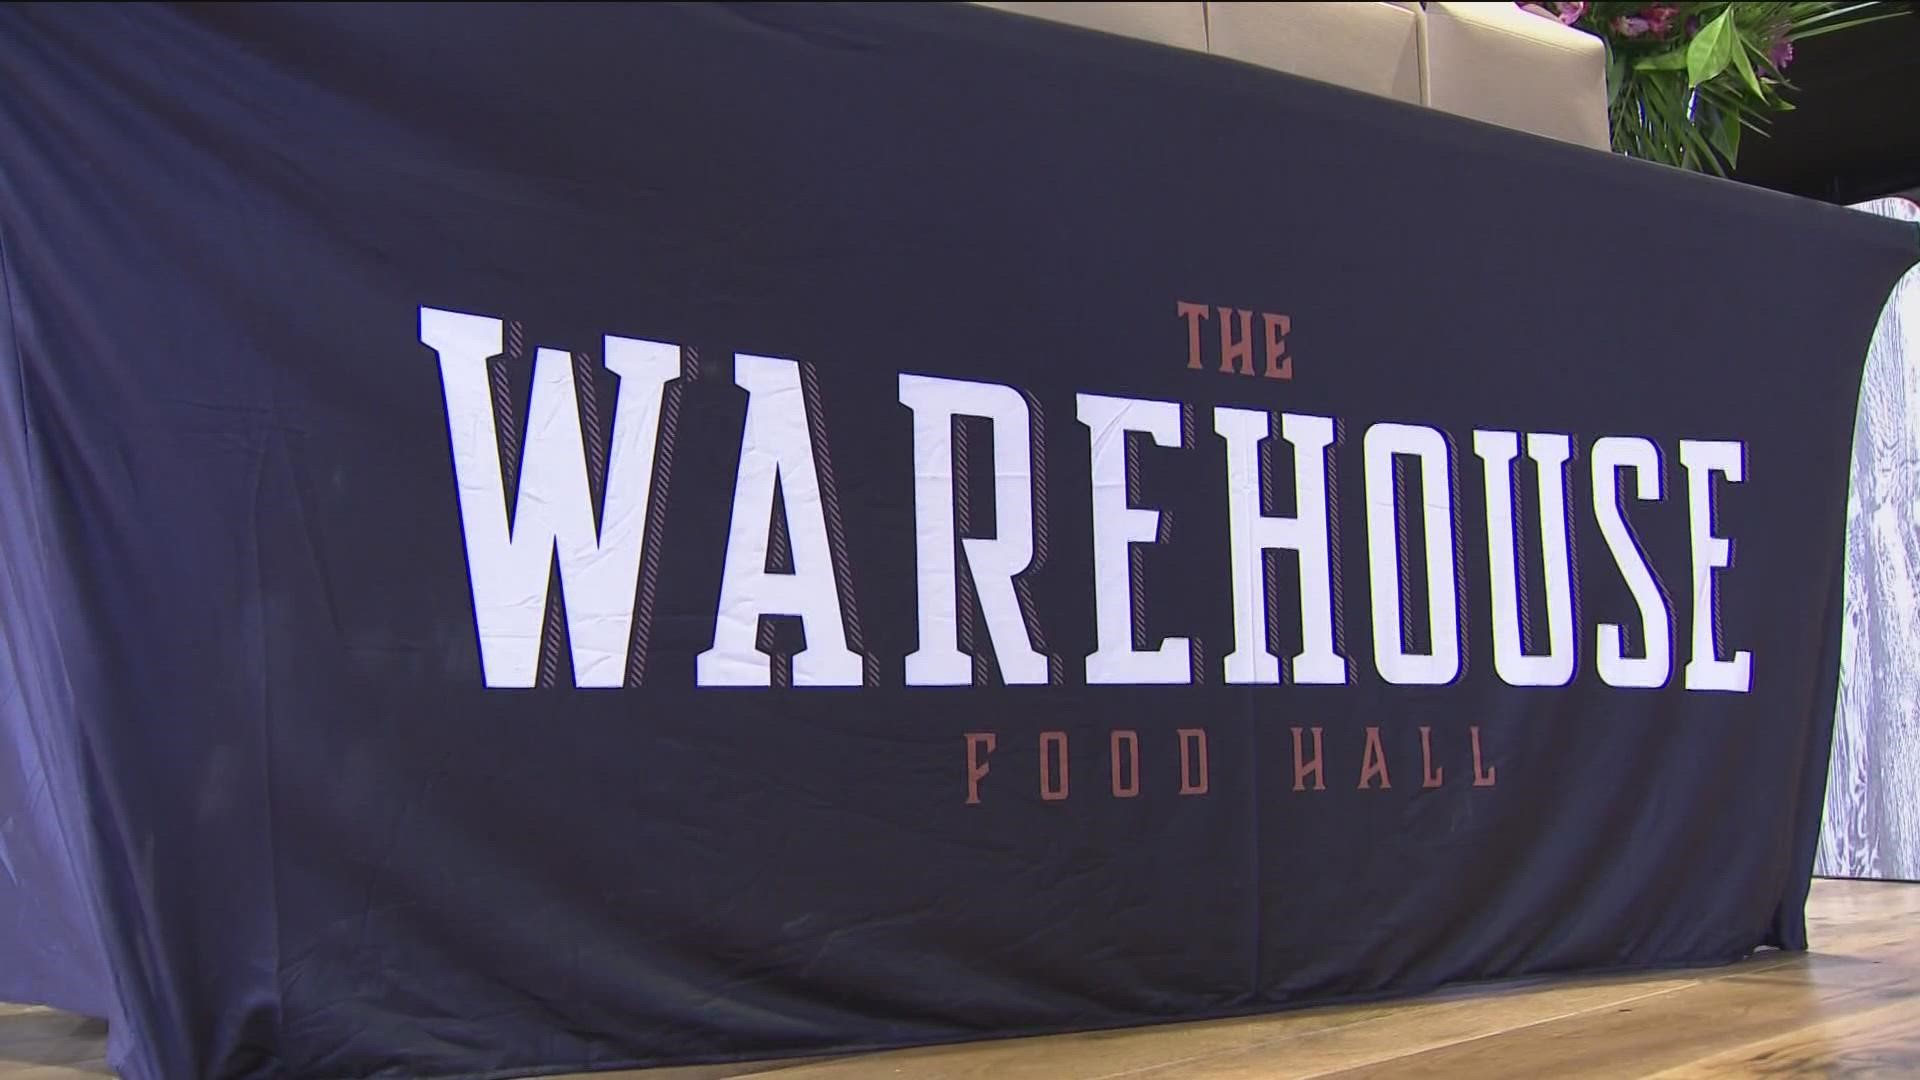 The Warehouse Food Hall is scheduled to open July 12. The food hall is a 29,000 square-foot space and featuring up to 20 food, beverage and retail vendors.